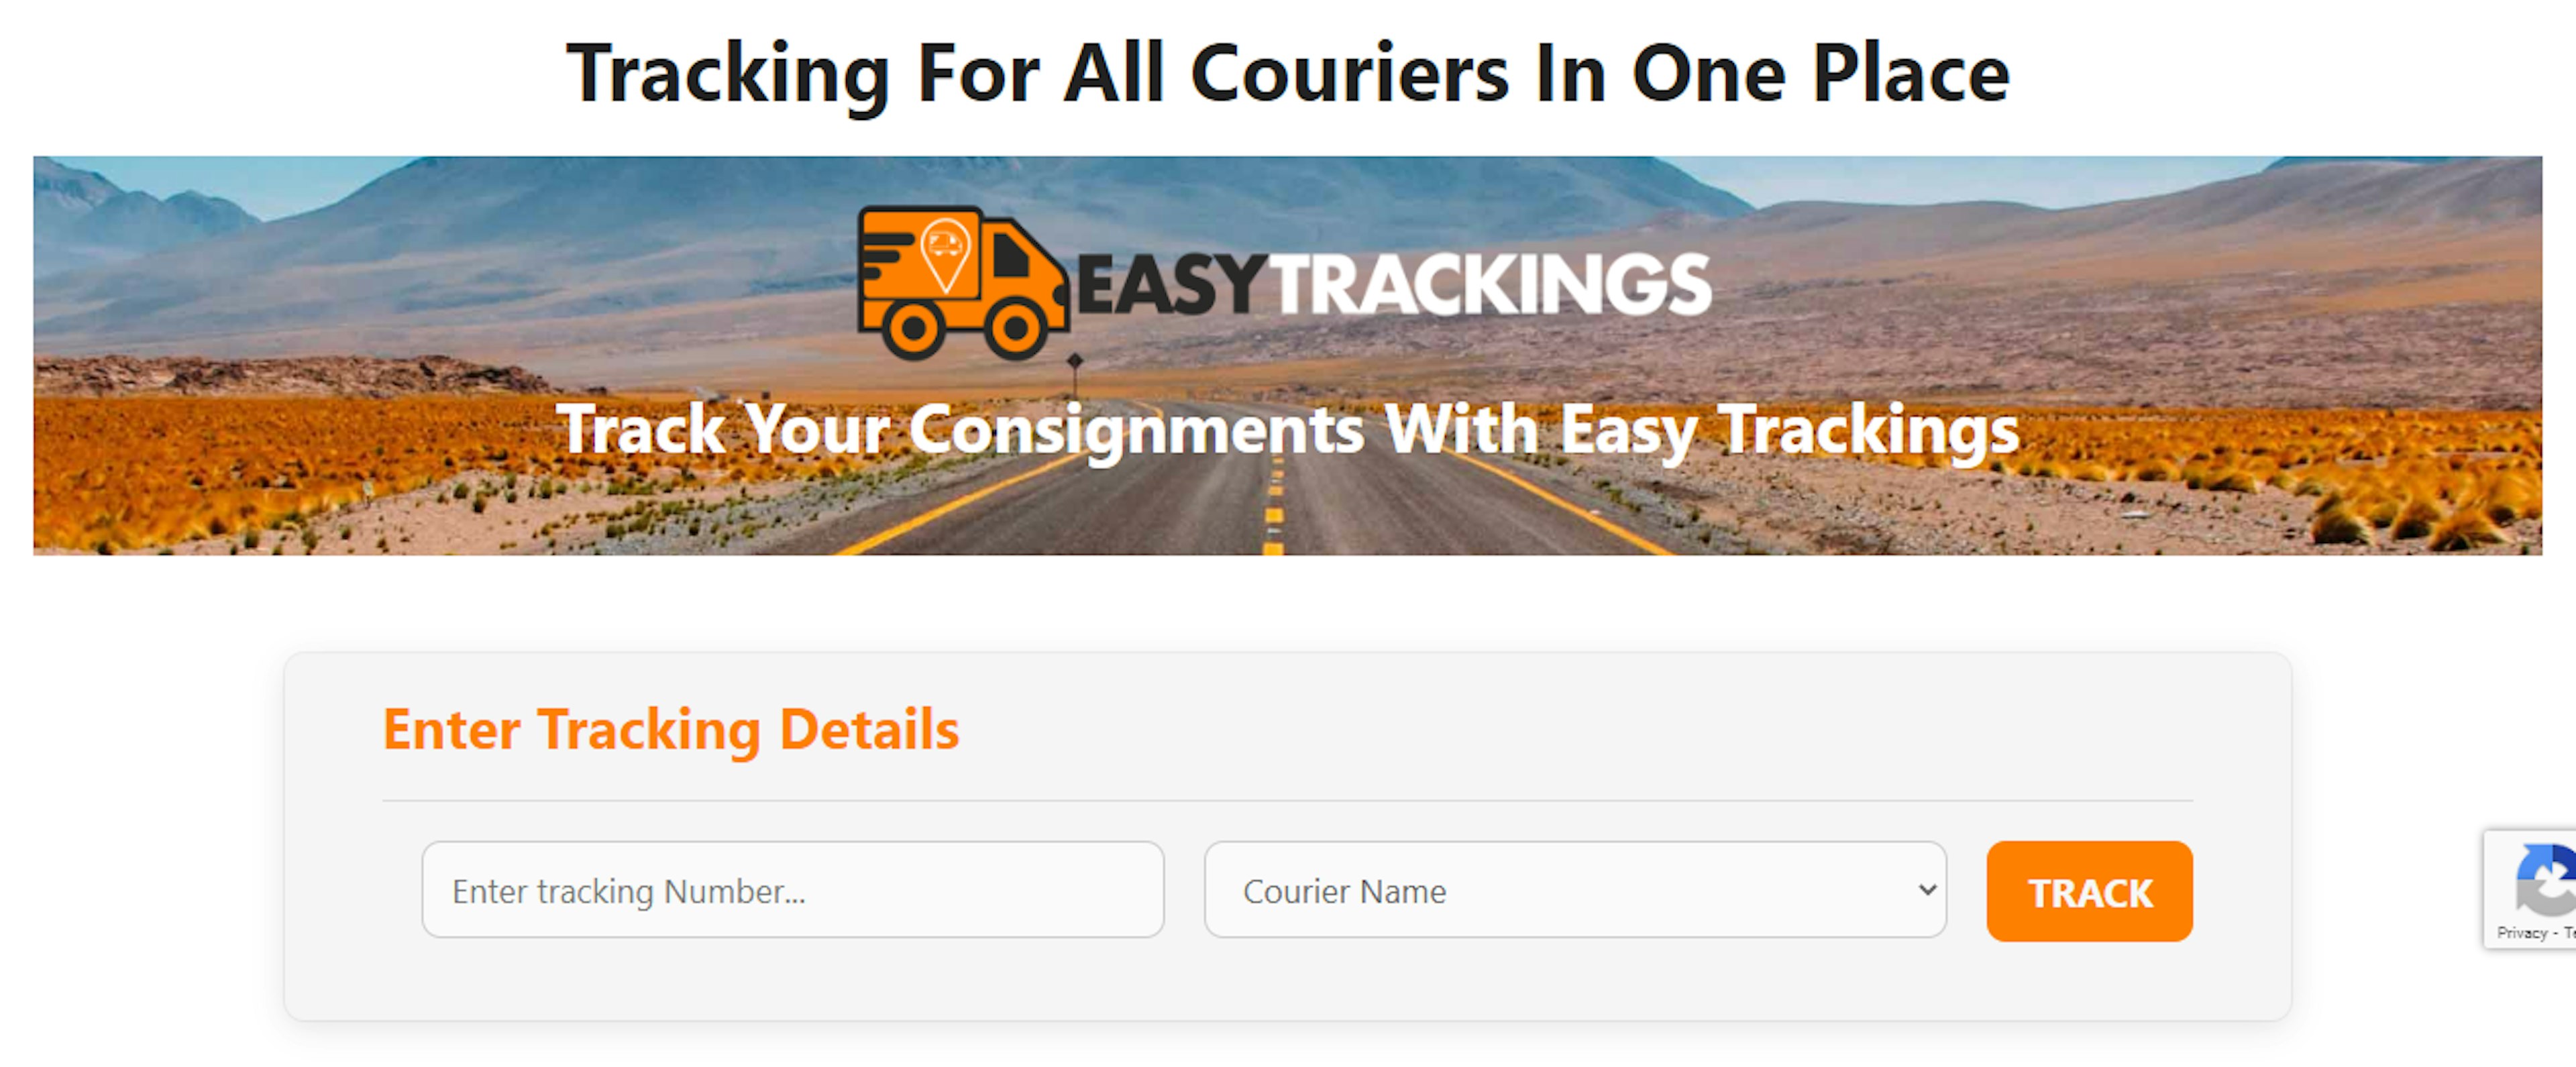 Tracking Pandora with EasyTrackings shipment tracking platform. The interface is designed to be user-friendly, with a simple layout and instructions to input your tracking number and email address.